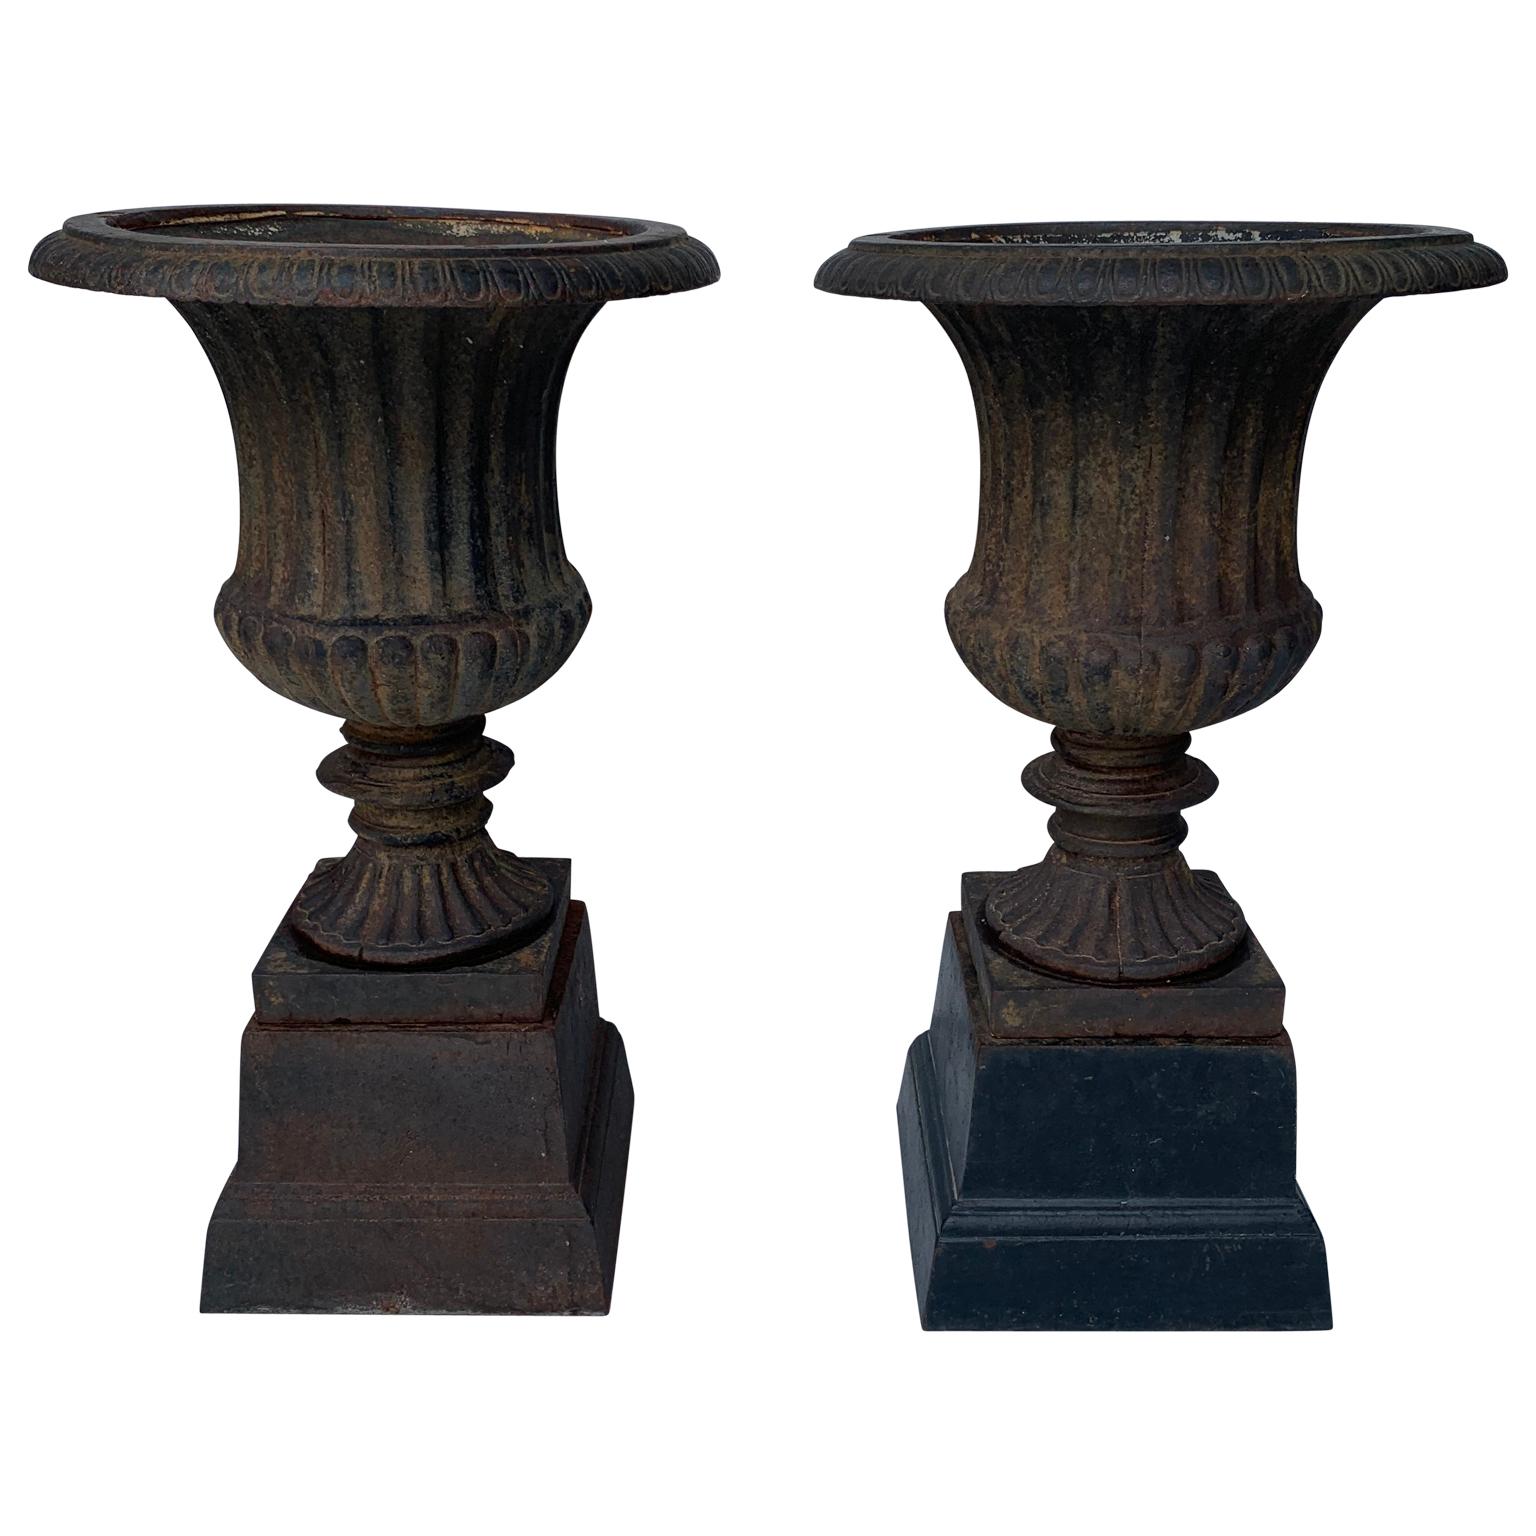 Pair of small late 19th century cast iron urns on stands.